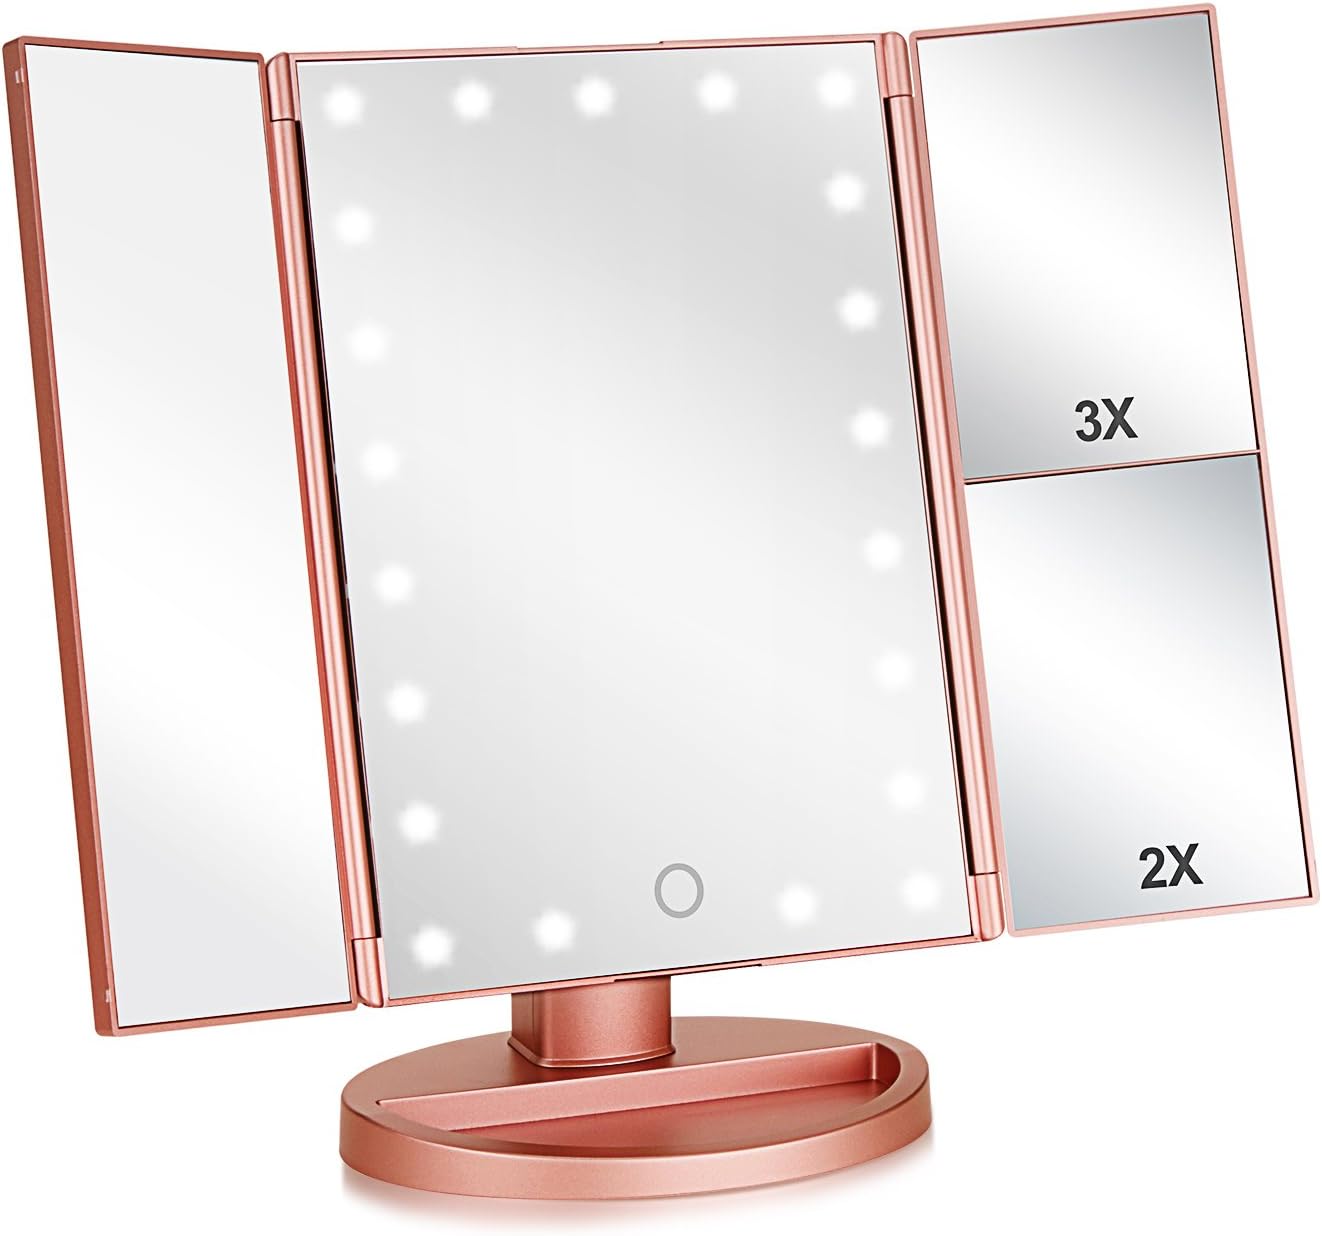 Tri-fold Lighted Vanity Makeup Mirror with 3x and 2x Magnification, 21 LEDs Light and Touch Screen, 180 Degree Free Rotation Countertop Cosmetic Mirror